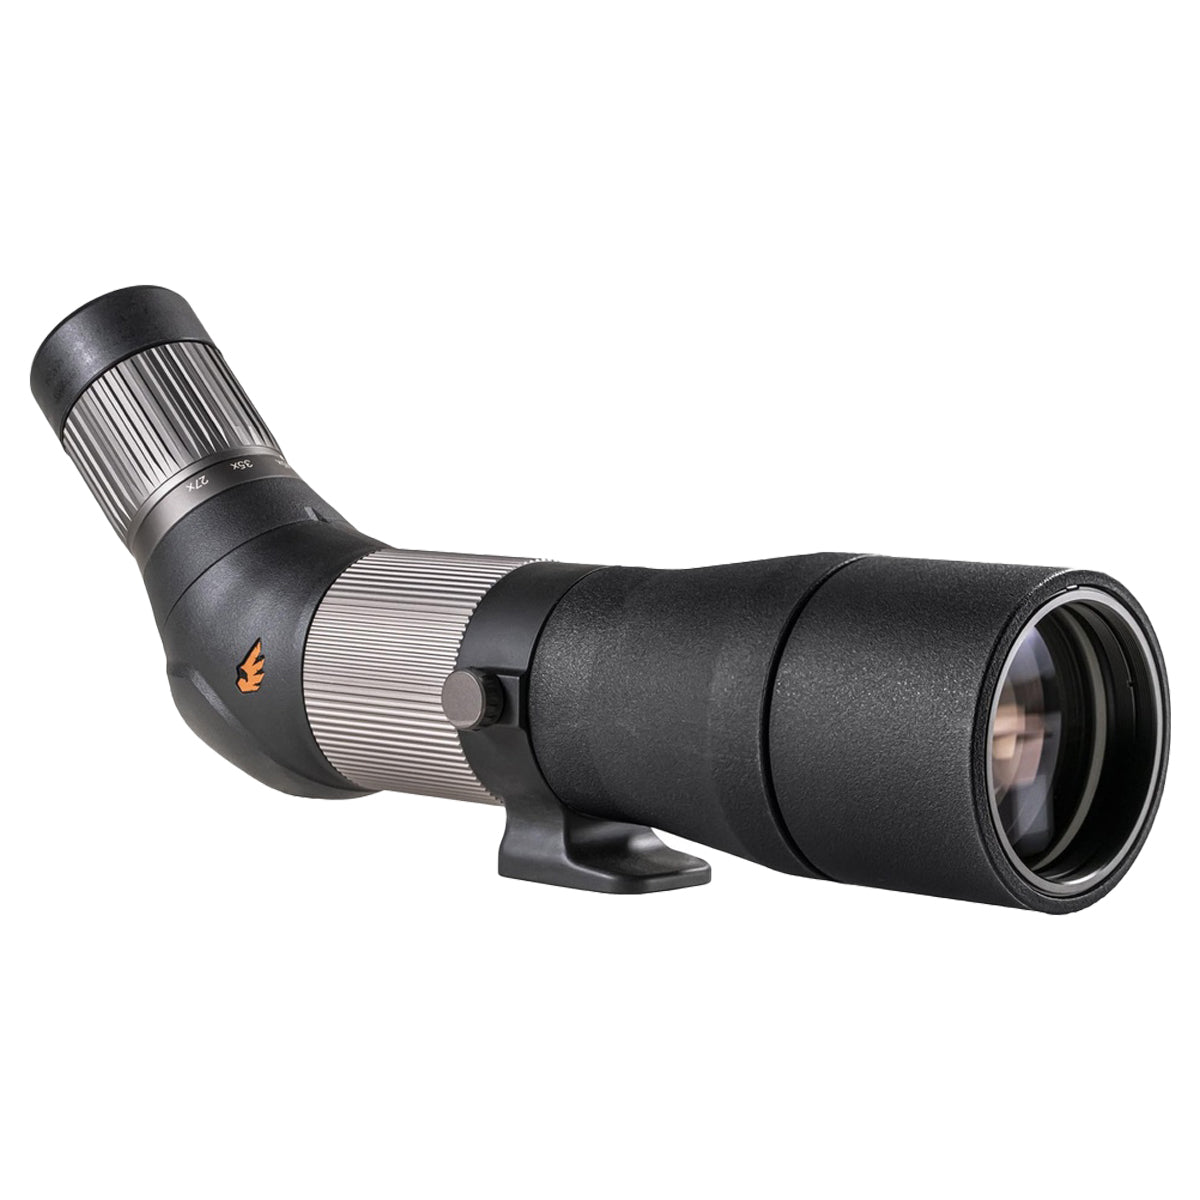 Revic Acura S65a Angled Spotting Scope